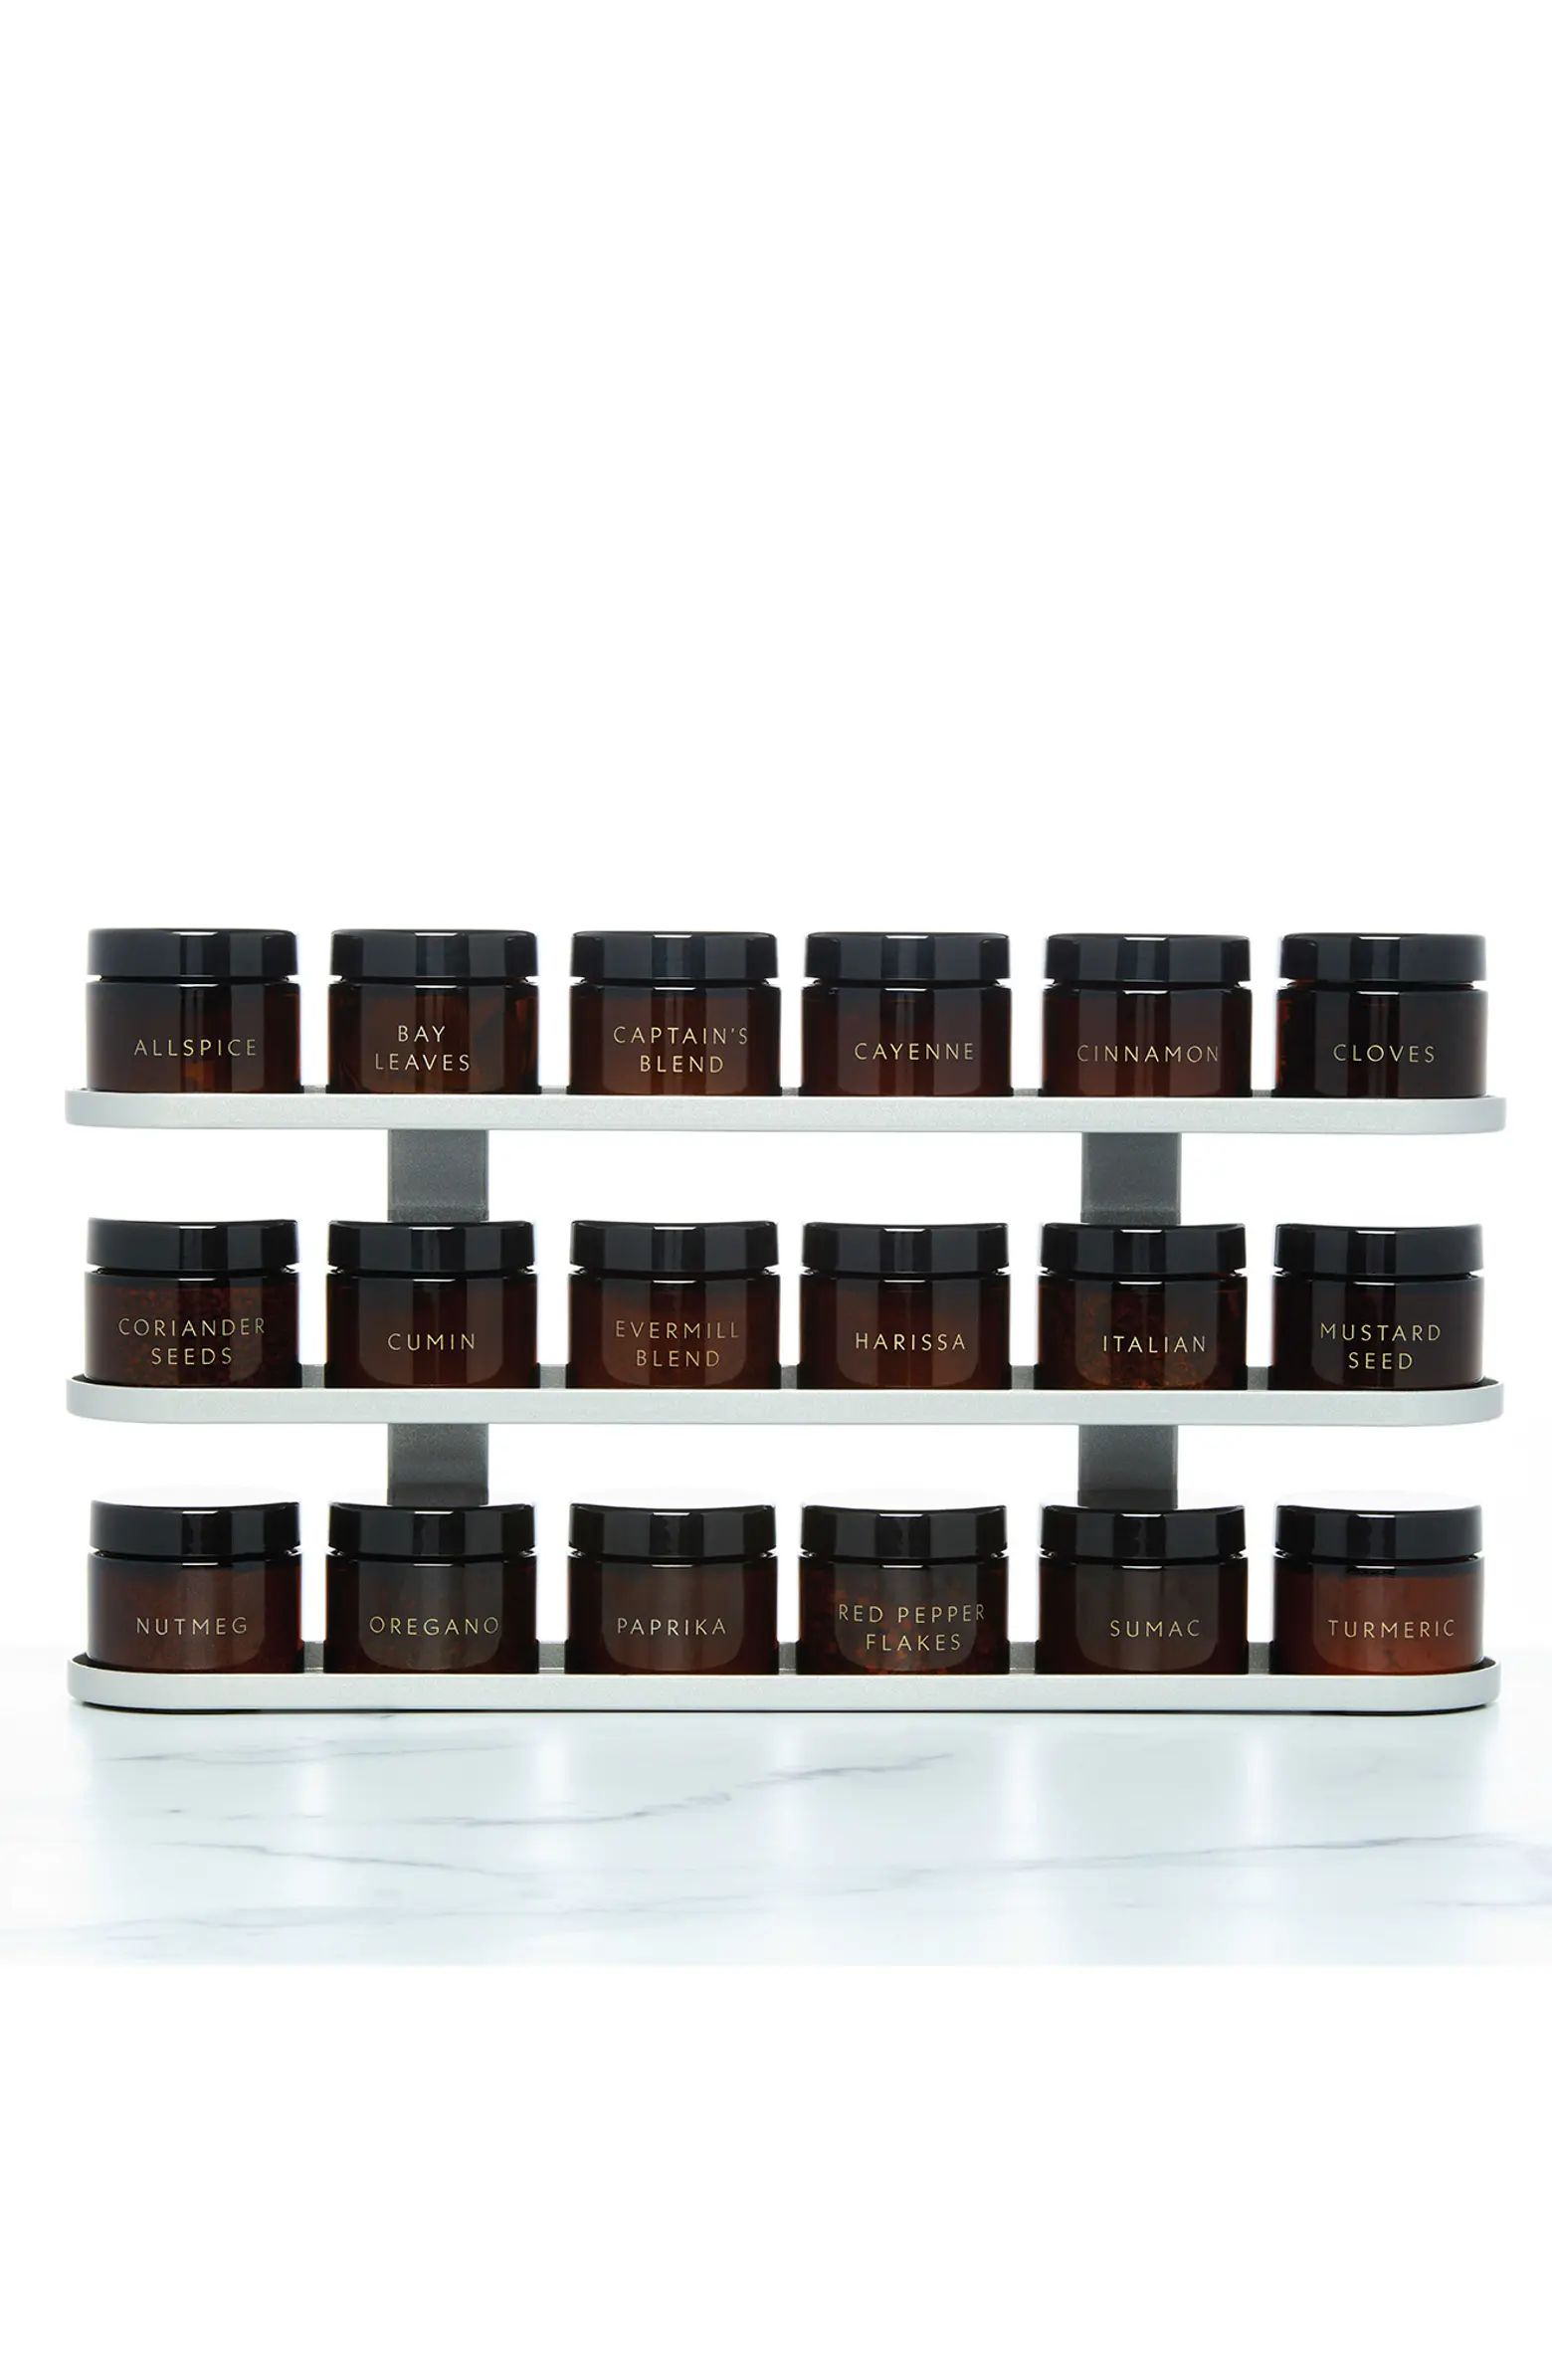 The Countertop Spice Rack | Nordstrom